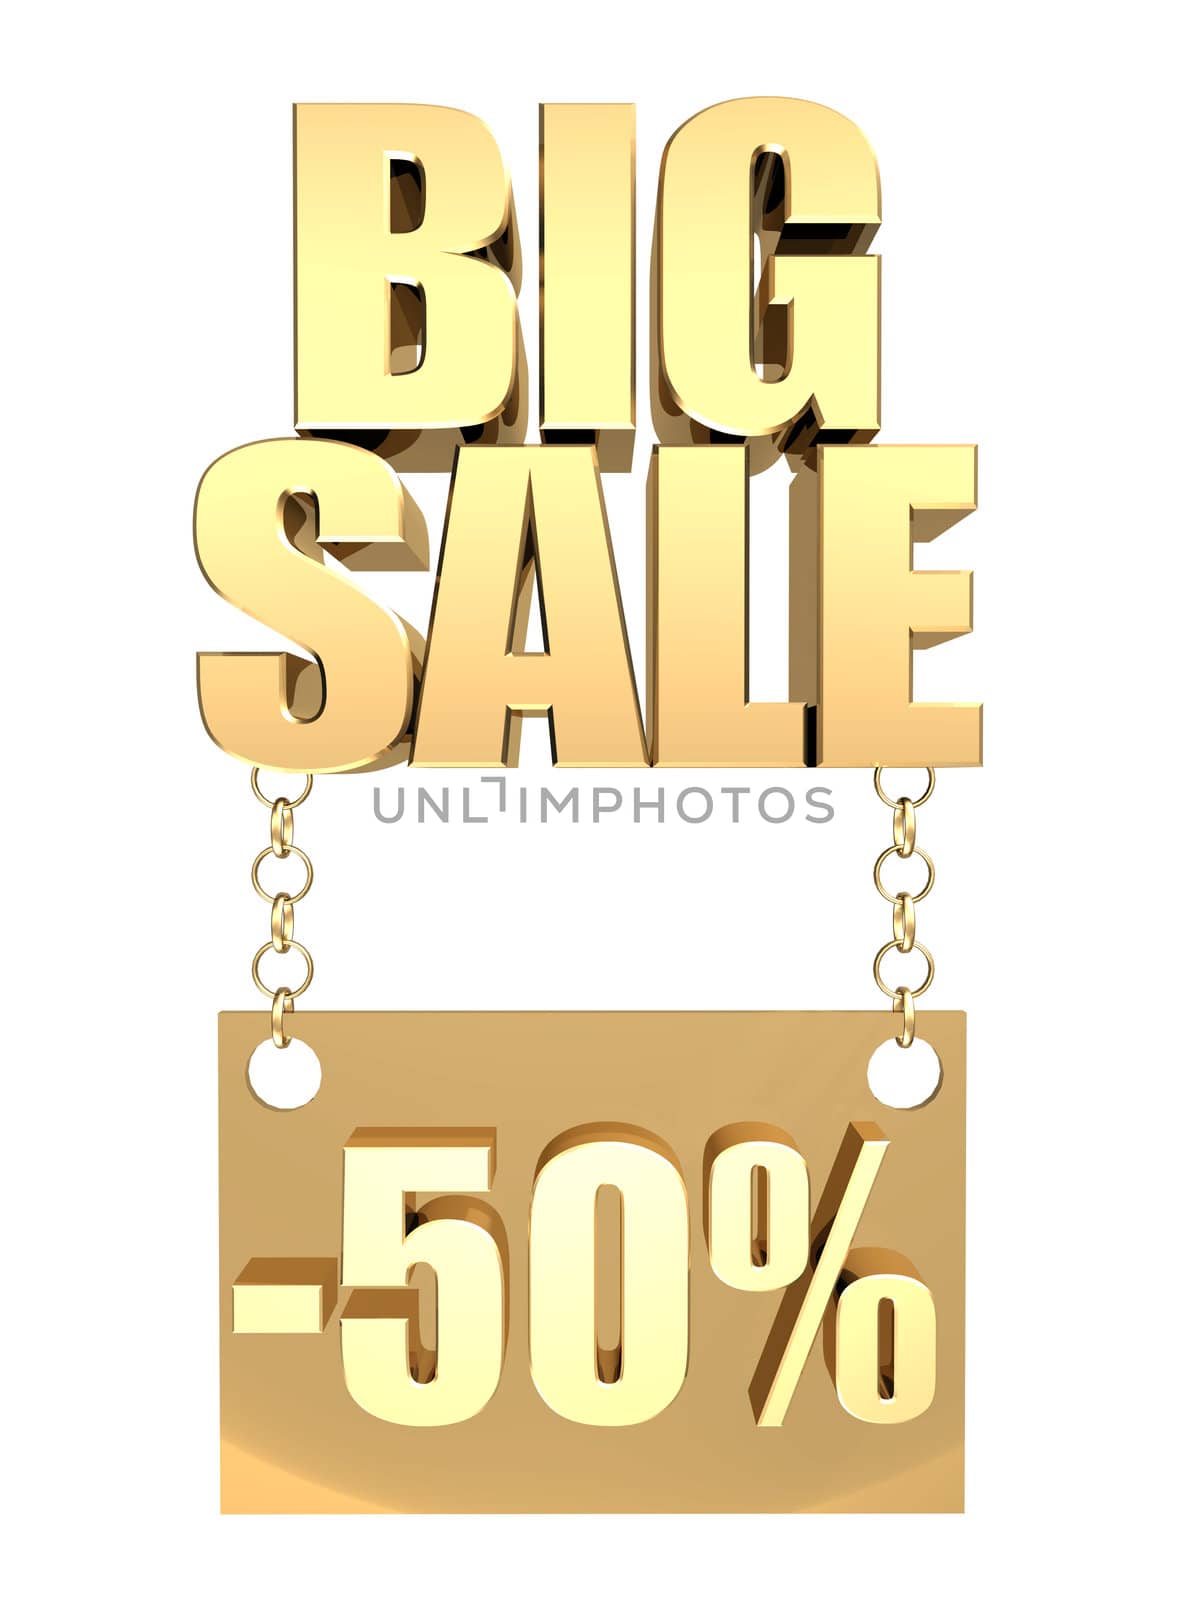 3D image of the text of a big sale, made of pure, beautiful gold